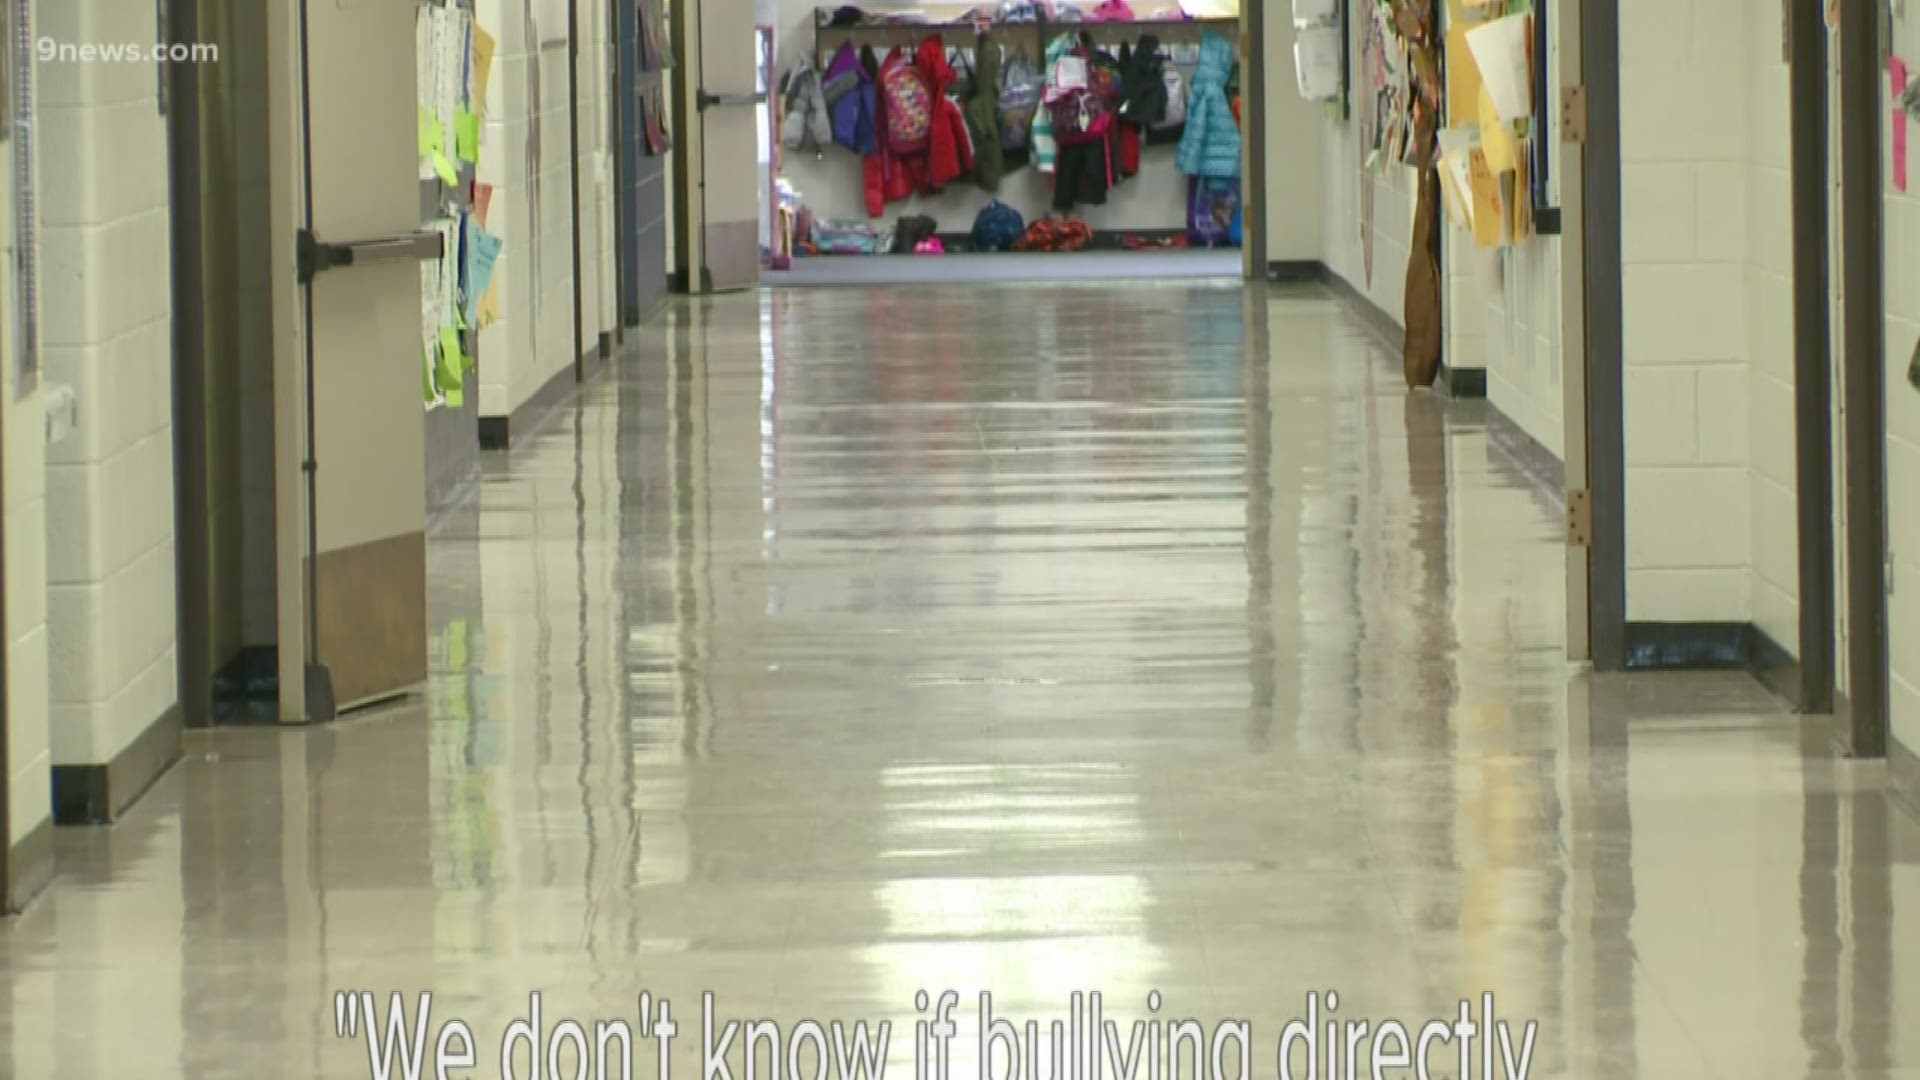 We spoke to a family who knows all too well the impact bullying can have on a child.